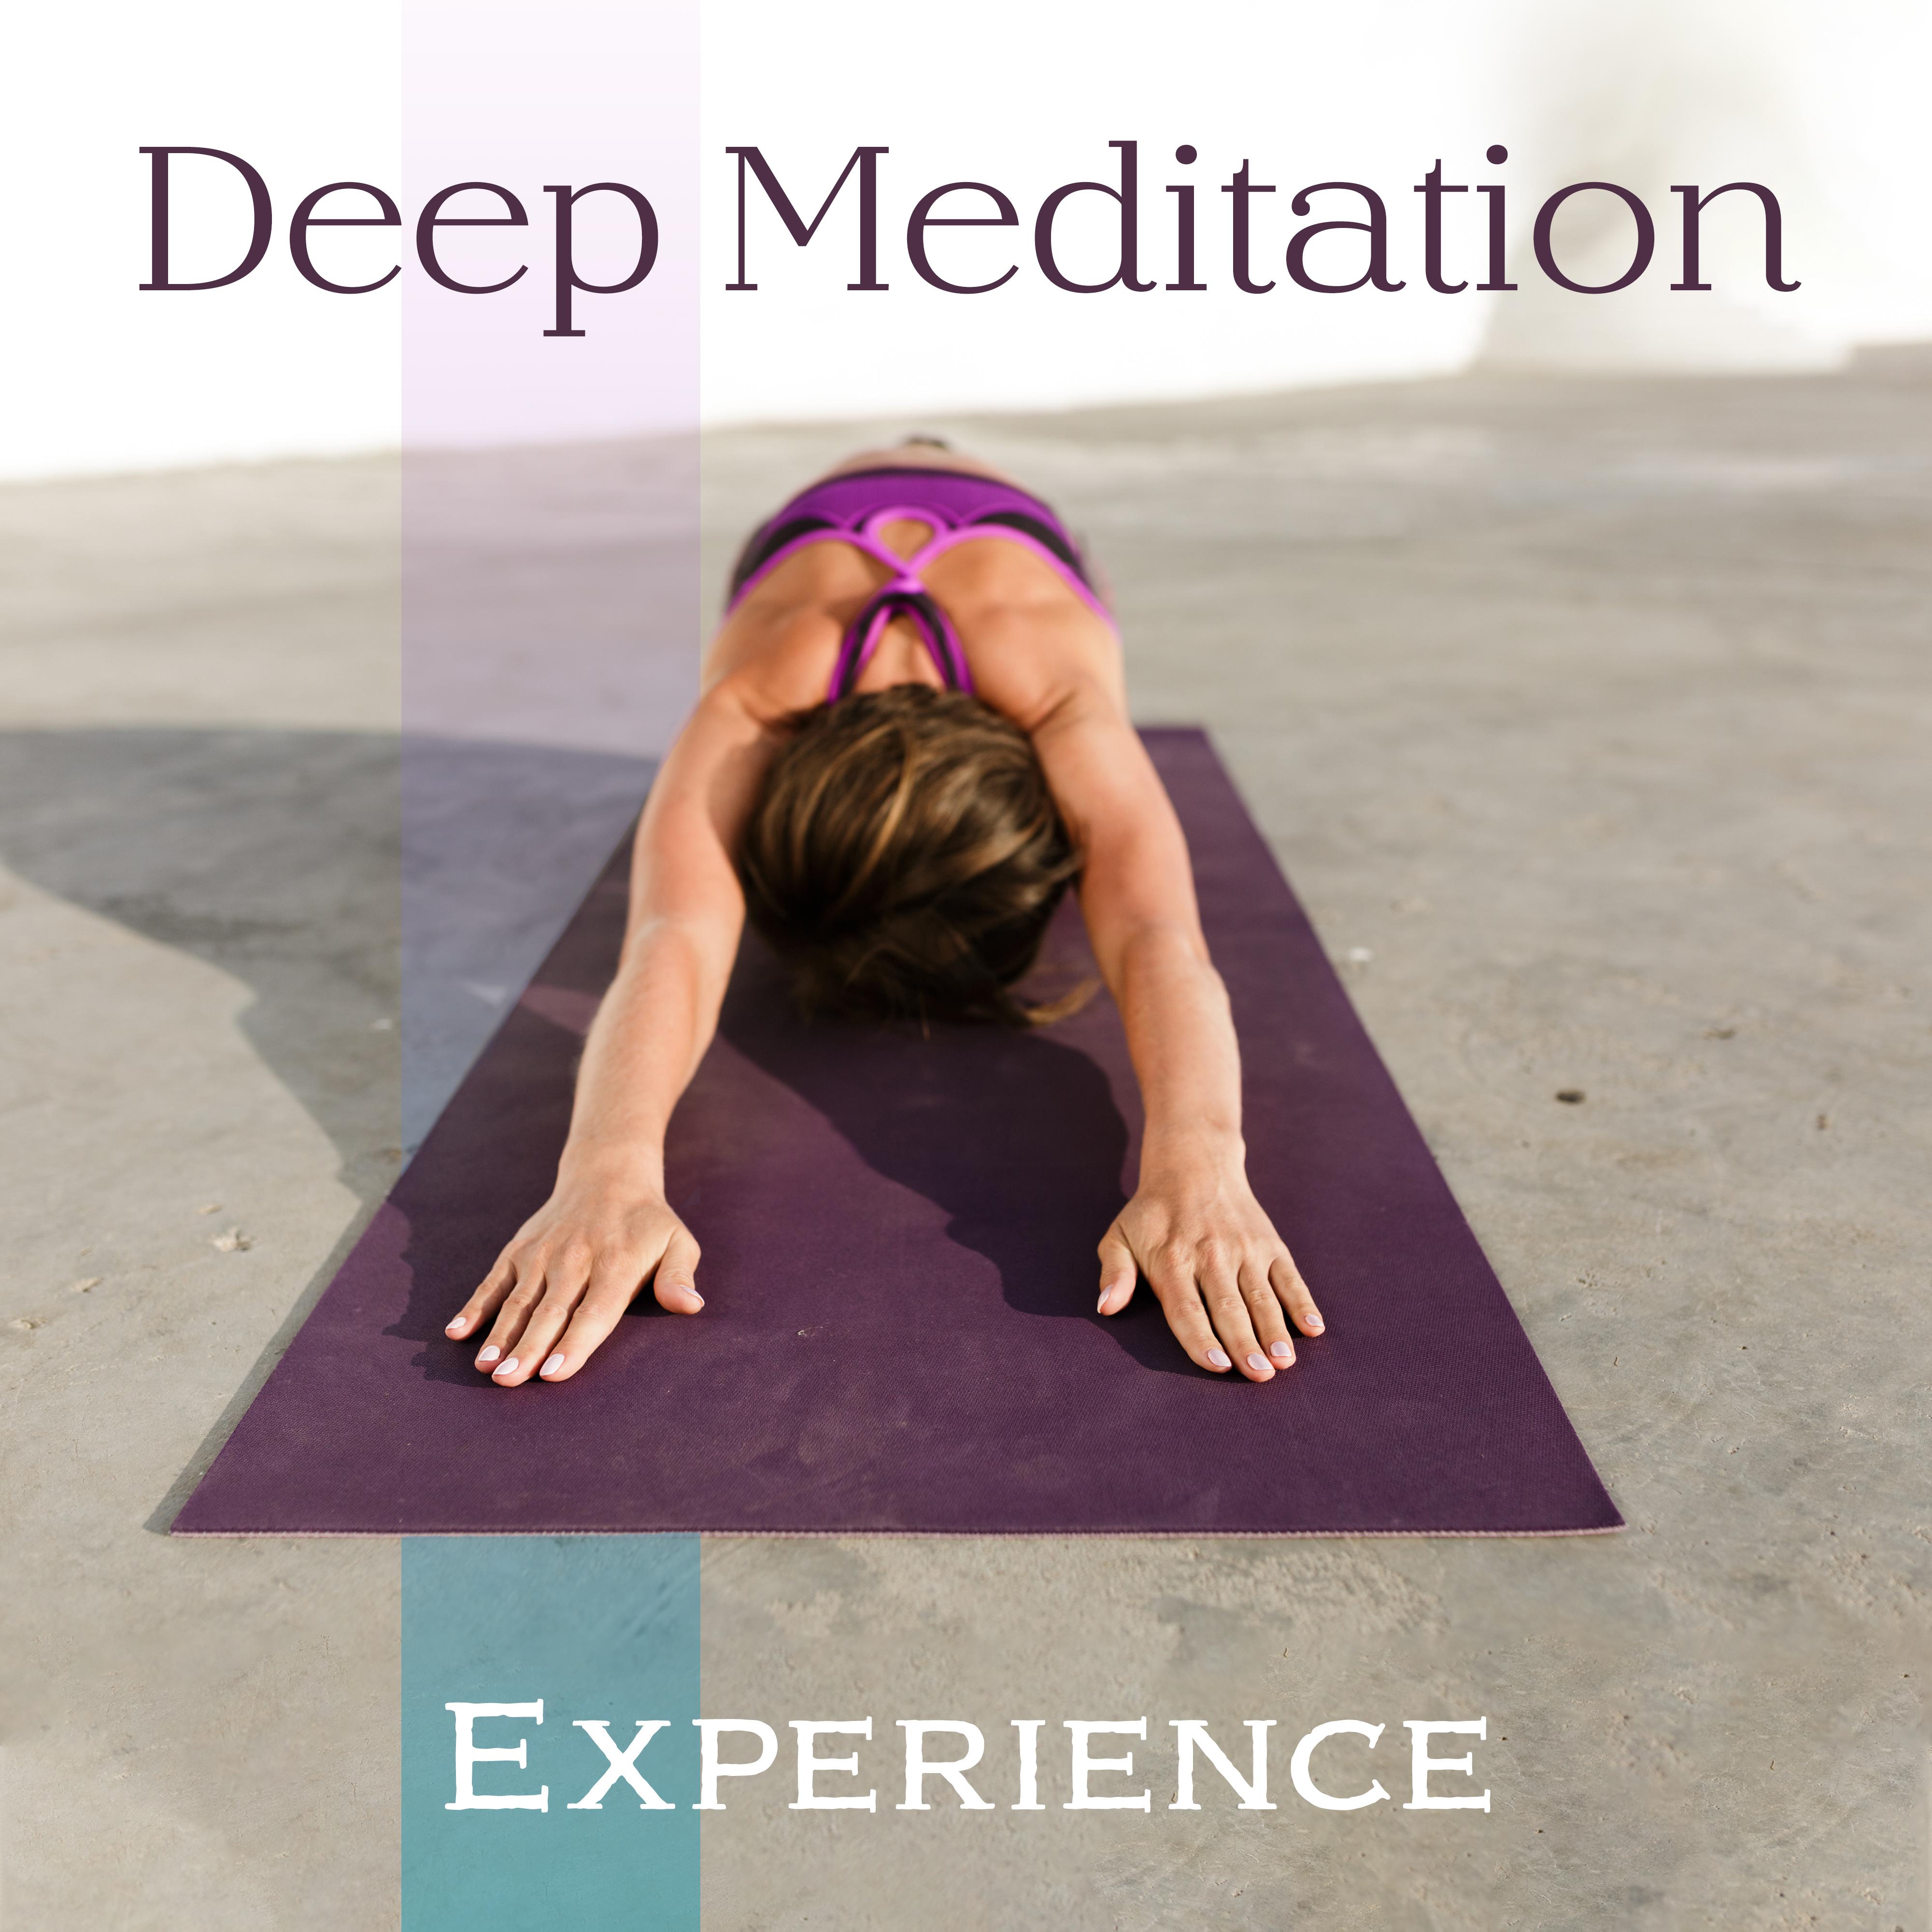 Deep Meditation Experience: Listen & Completely Immerse Yourself in Meditation to Discover New Altered States of Consciousness